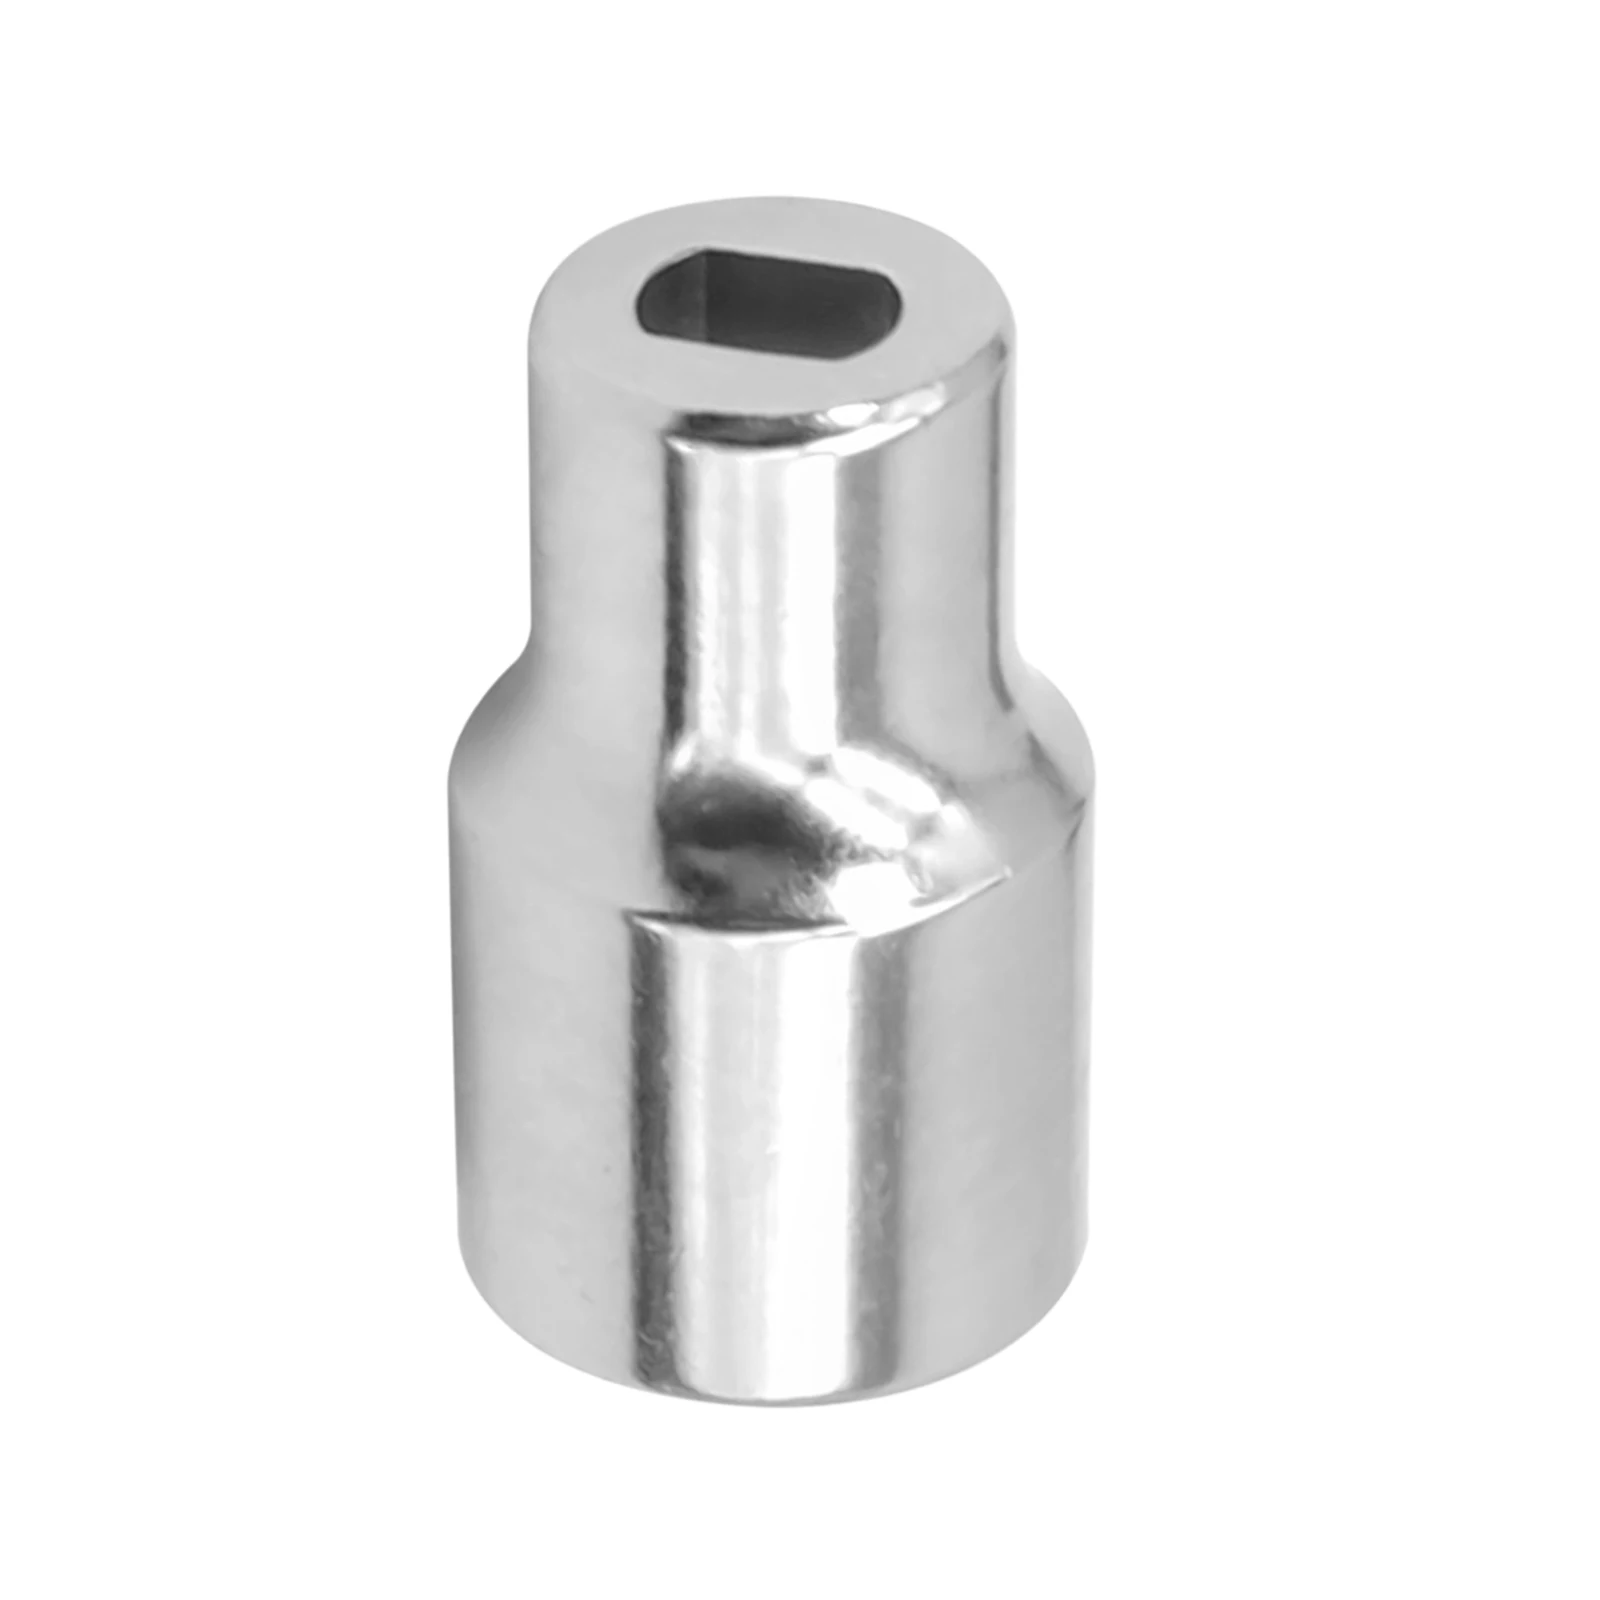 25284 Steel Shock Absorber Socket 3/8 Drive Remove Replace Absorbers Fit the Double D Stem Tools for GM Cars